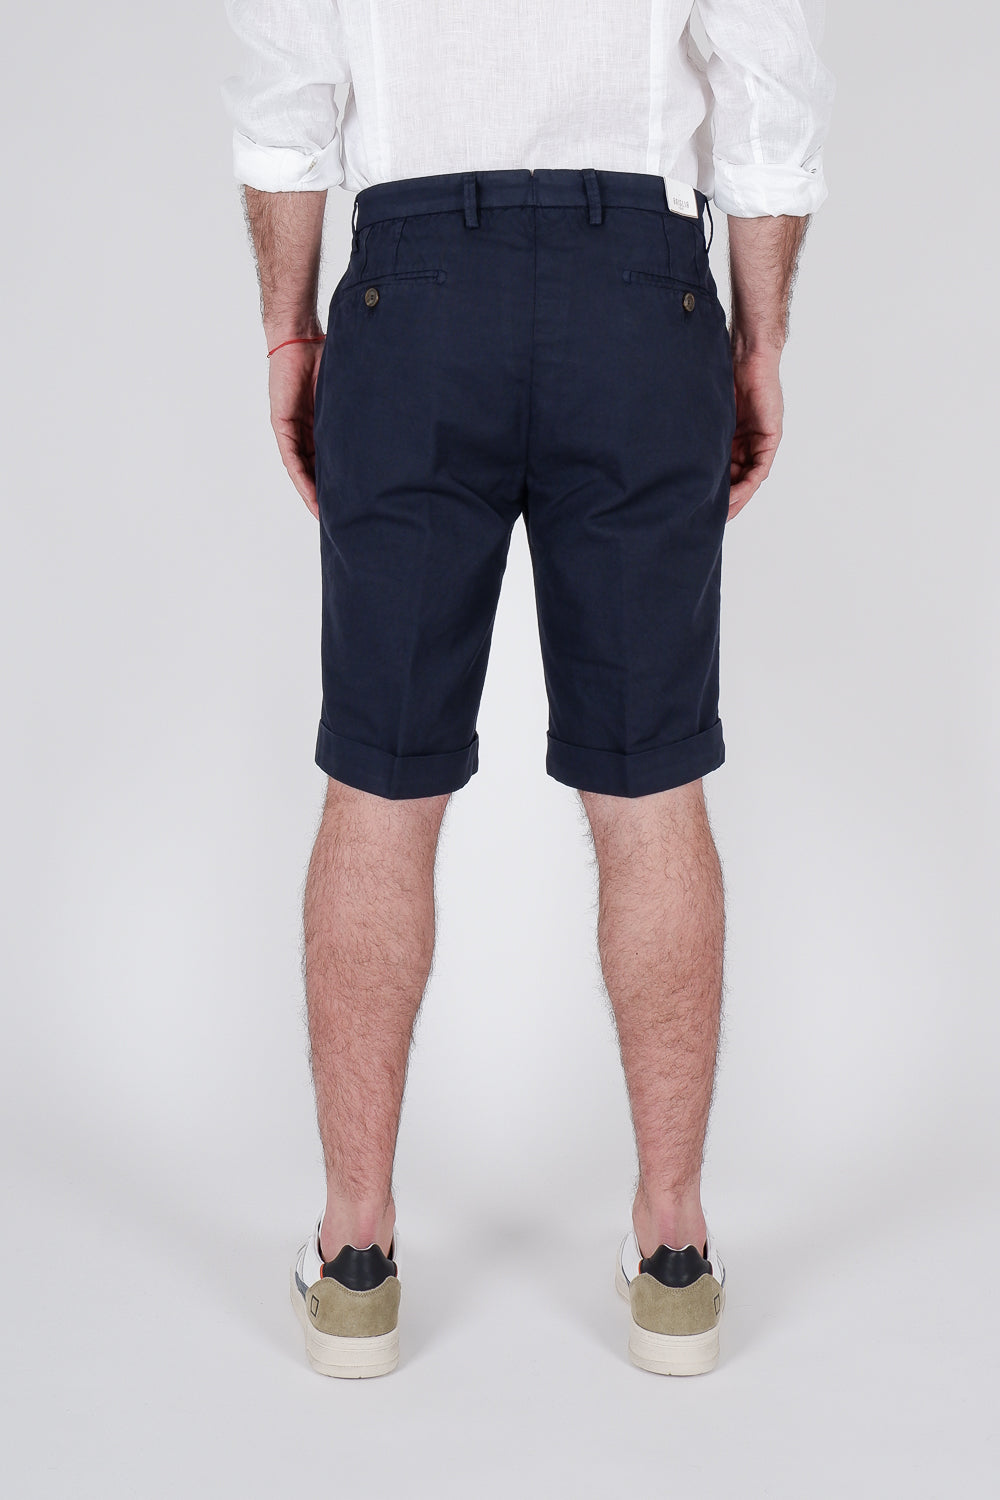 Buy the Briglia Italian Cotton Chino Shorts in Navy at Intro. Spend £100 for free UK delivery. Official stockists. We ship worldwide.